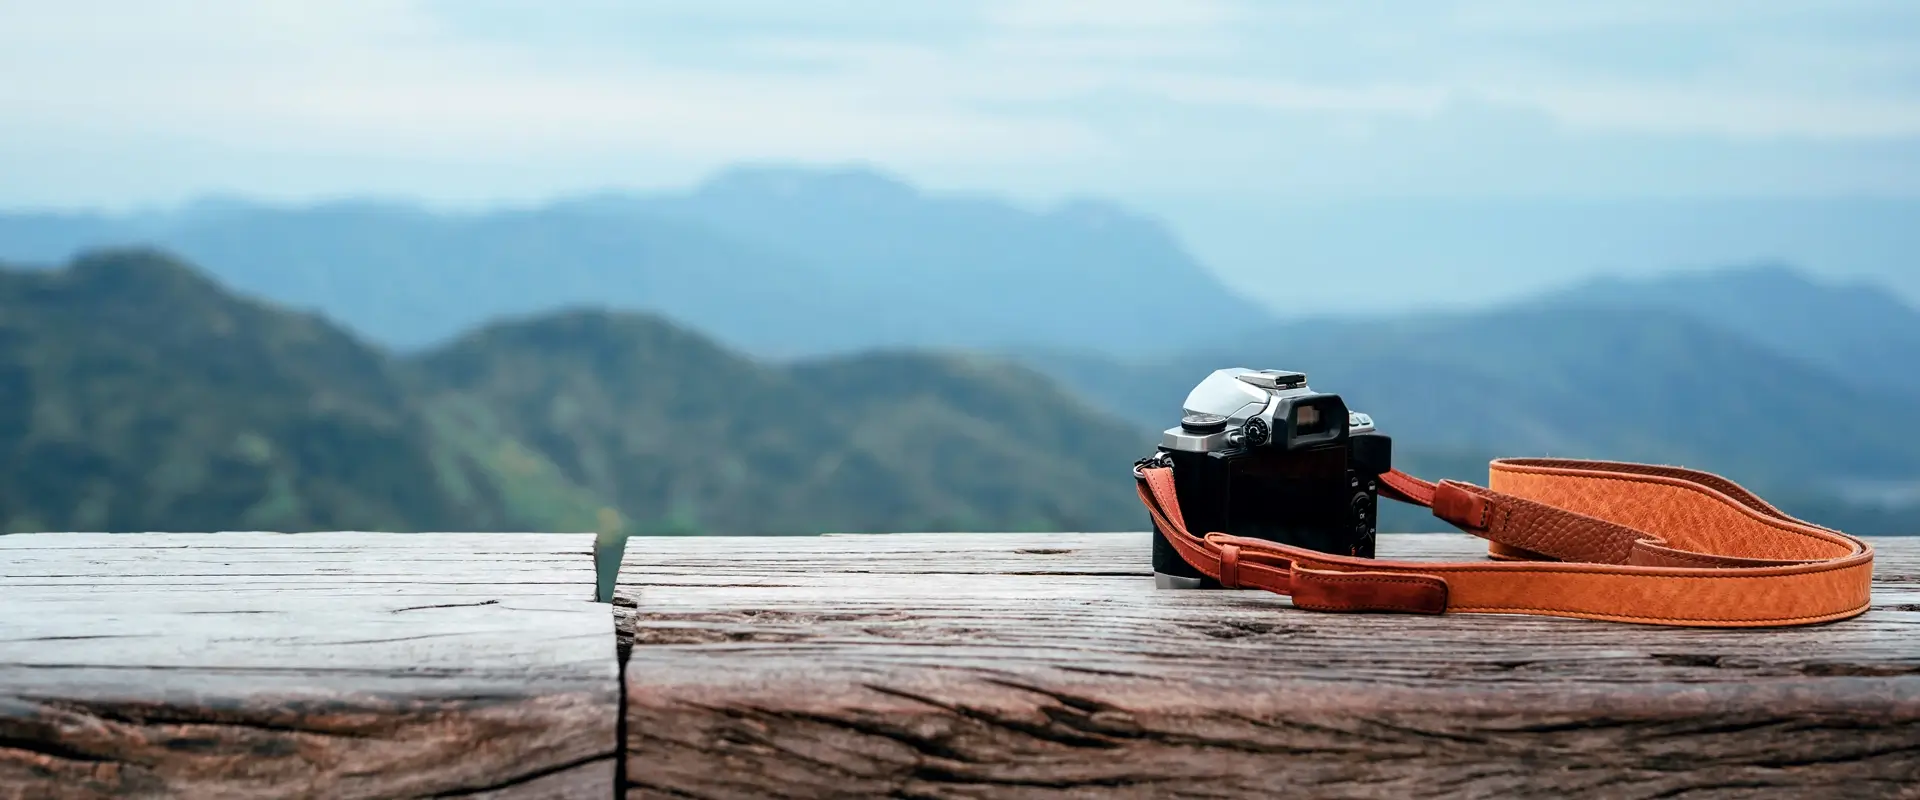 Camera on the background of a mountain landscape